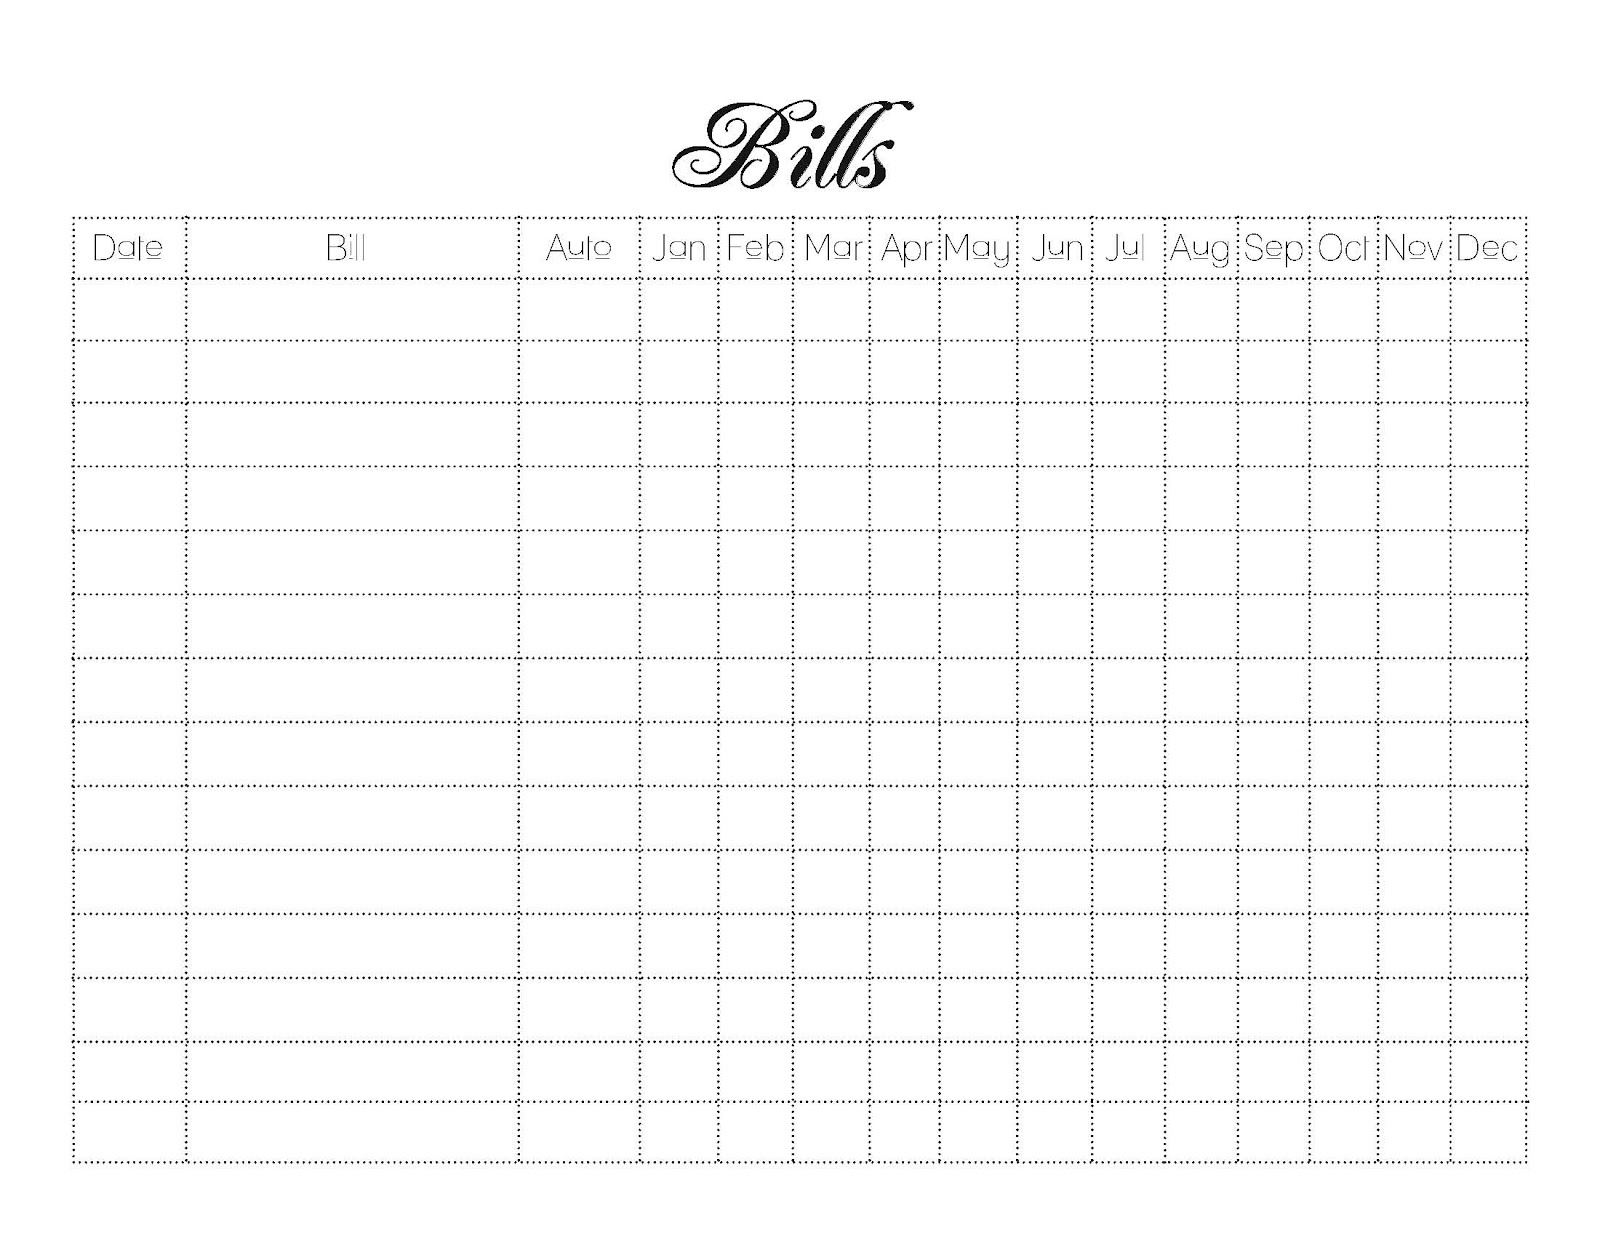 Free Printable Monthly Bill Templates Sample Of Monthly Bill  Microsoft Excel Bill Organizer Blank